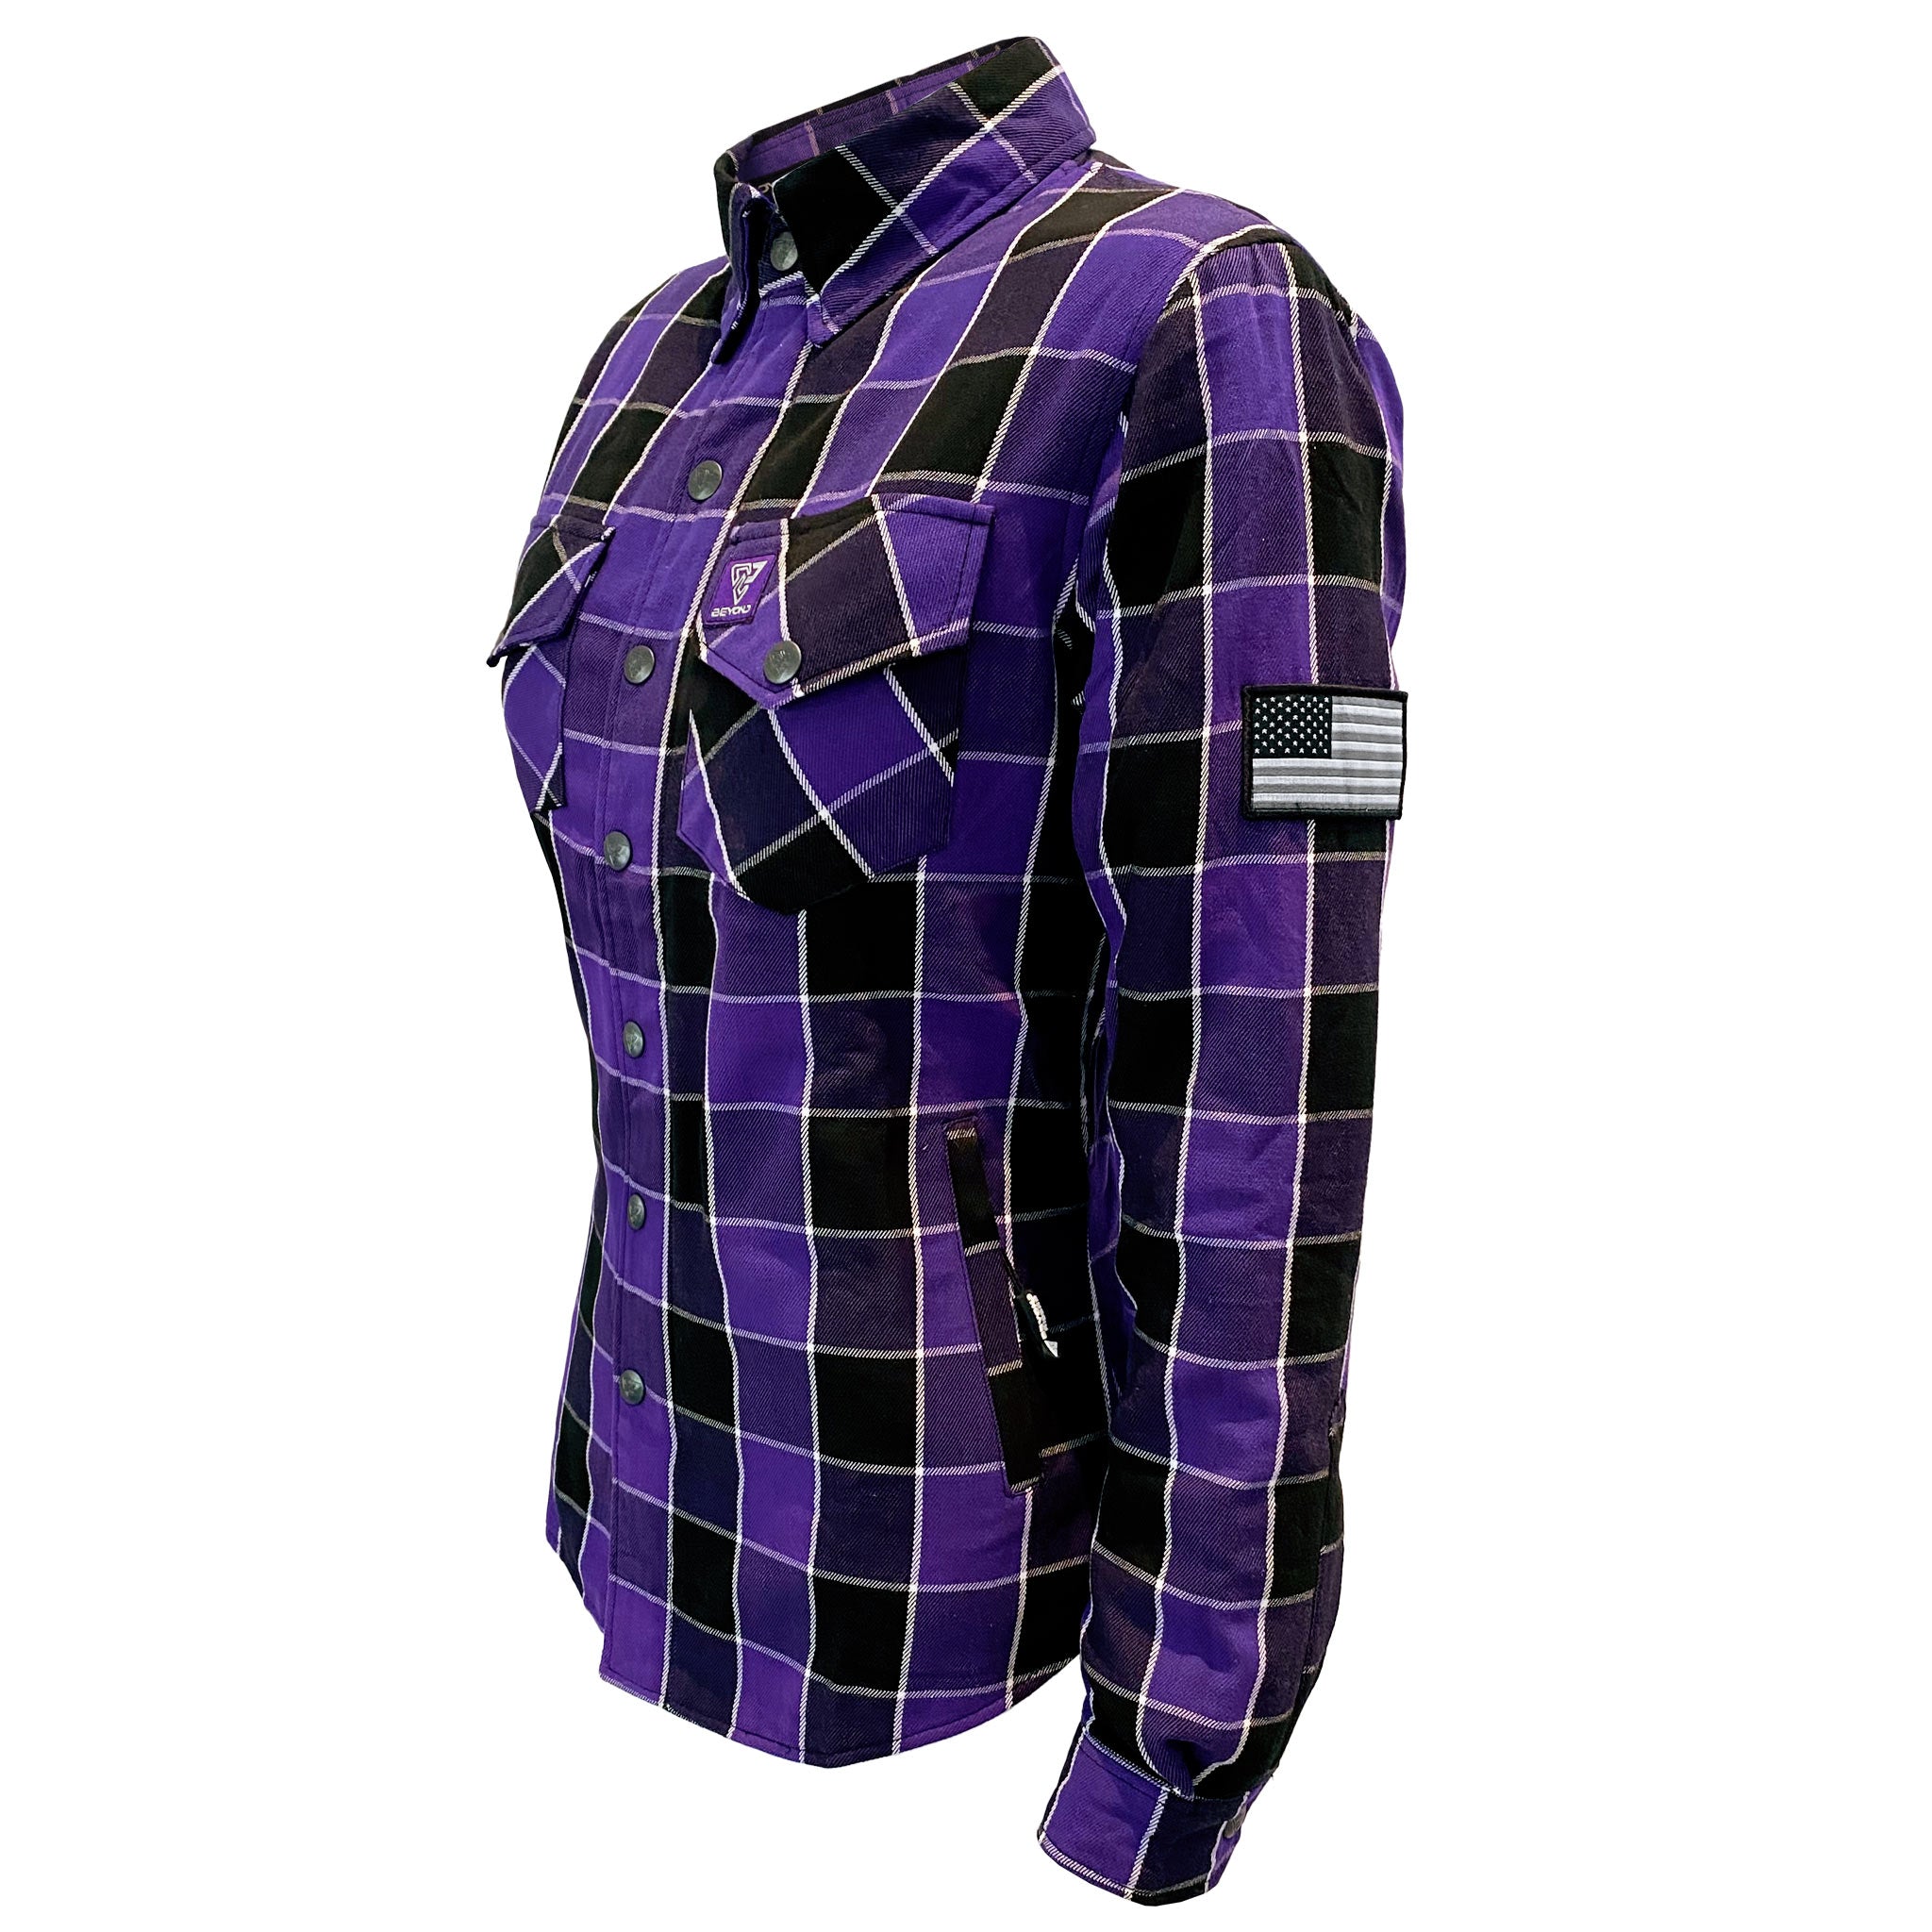 Women's-Flannel-Shirt-Purple-Black-Checkered-And-White-Strips-Left-45